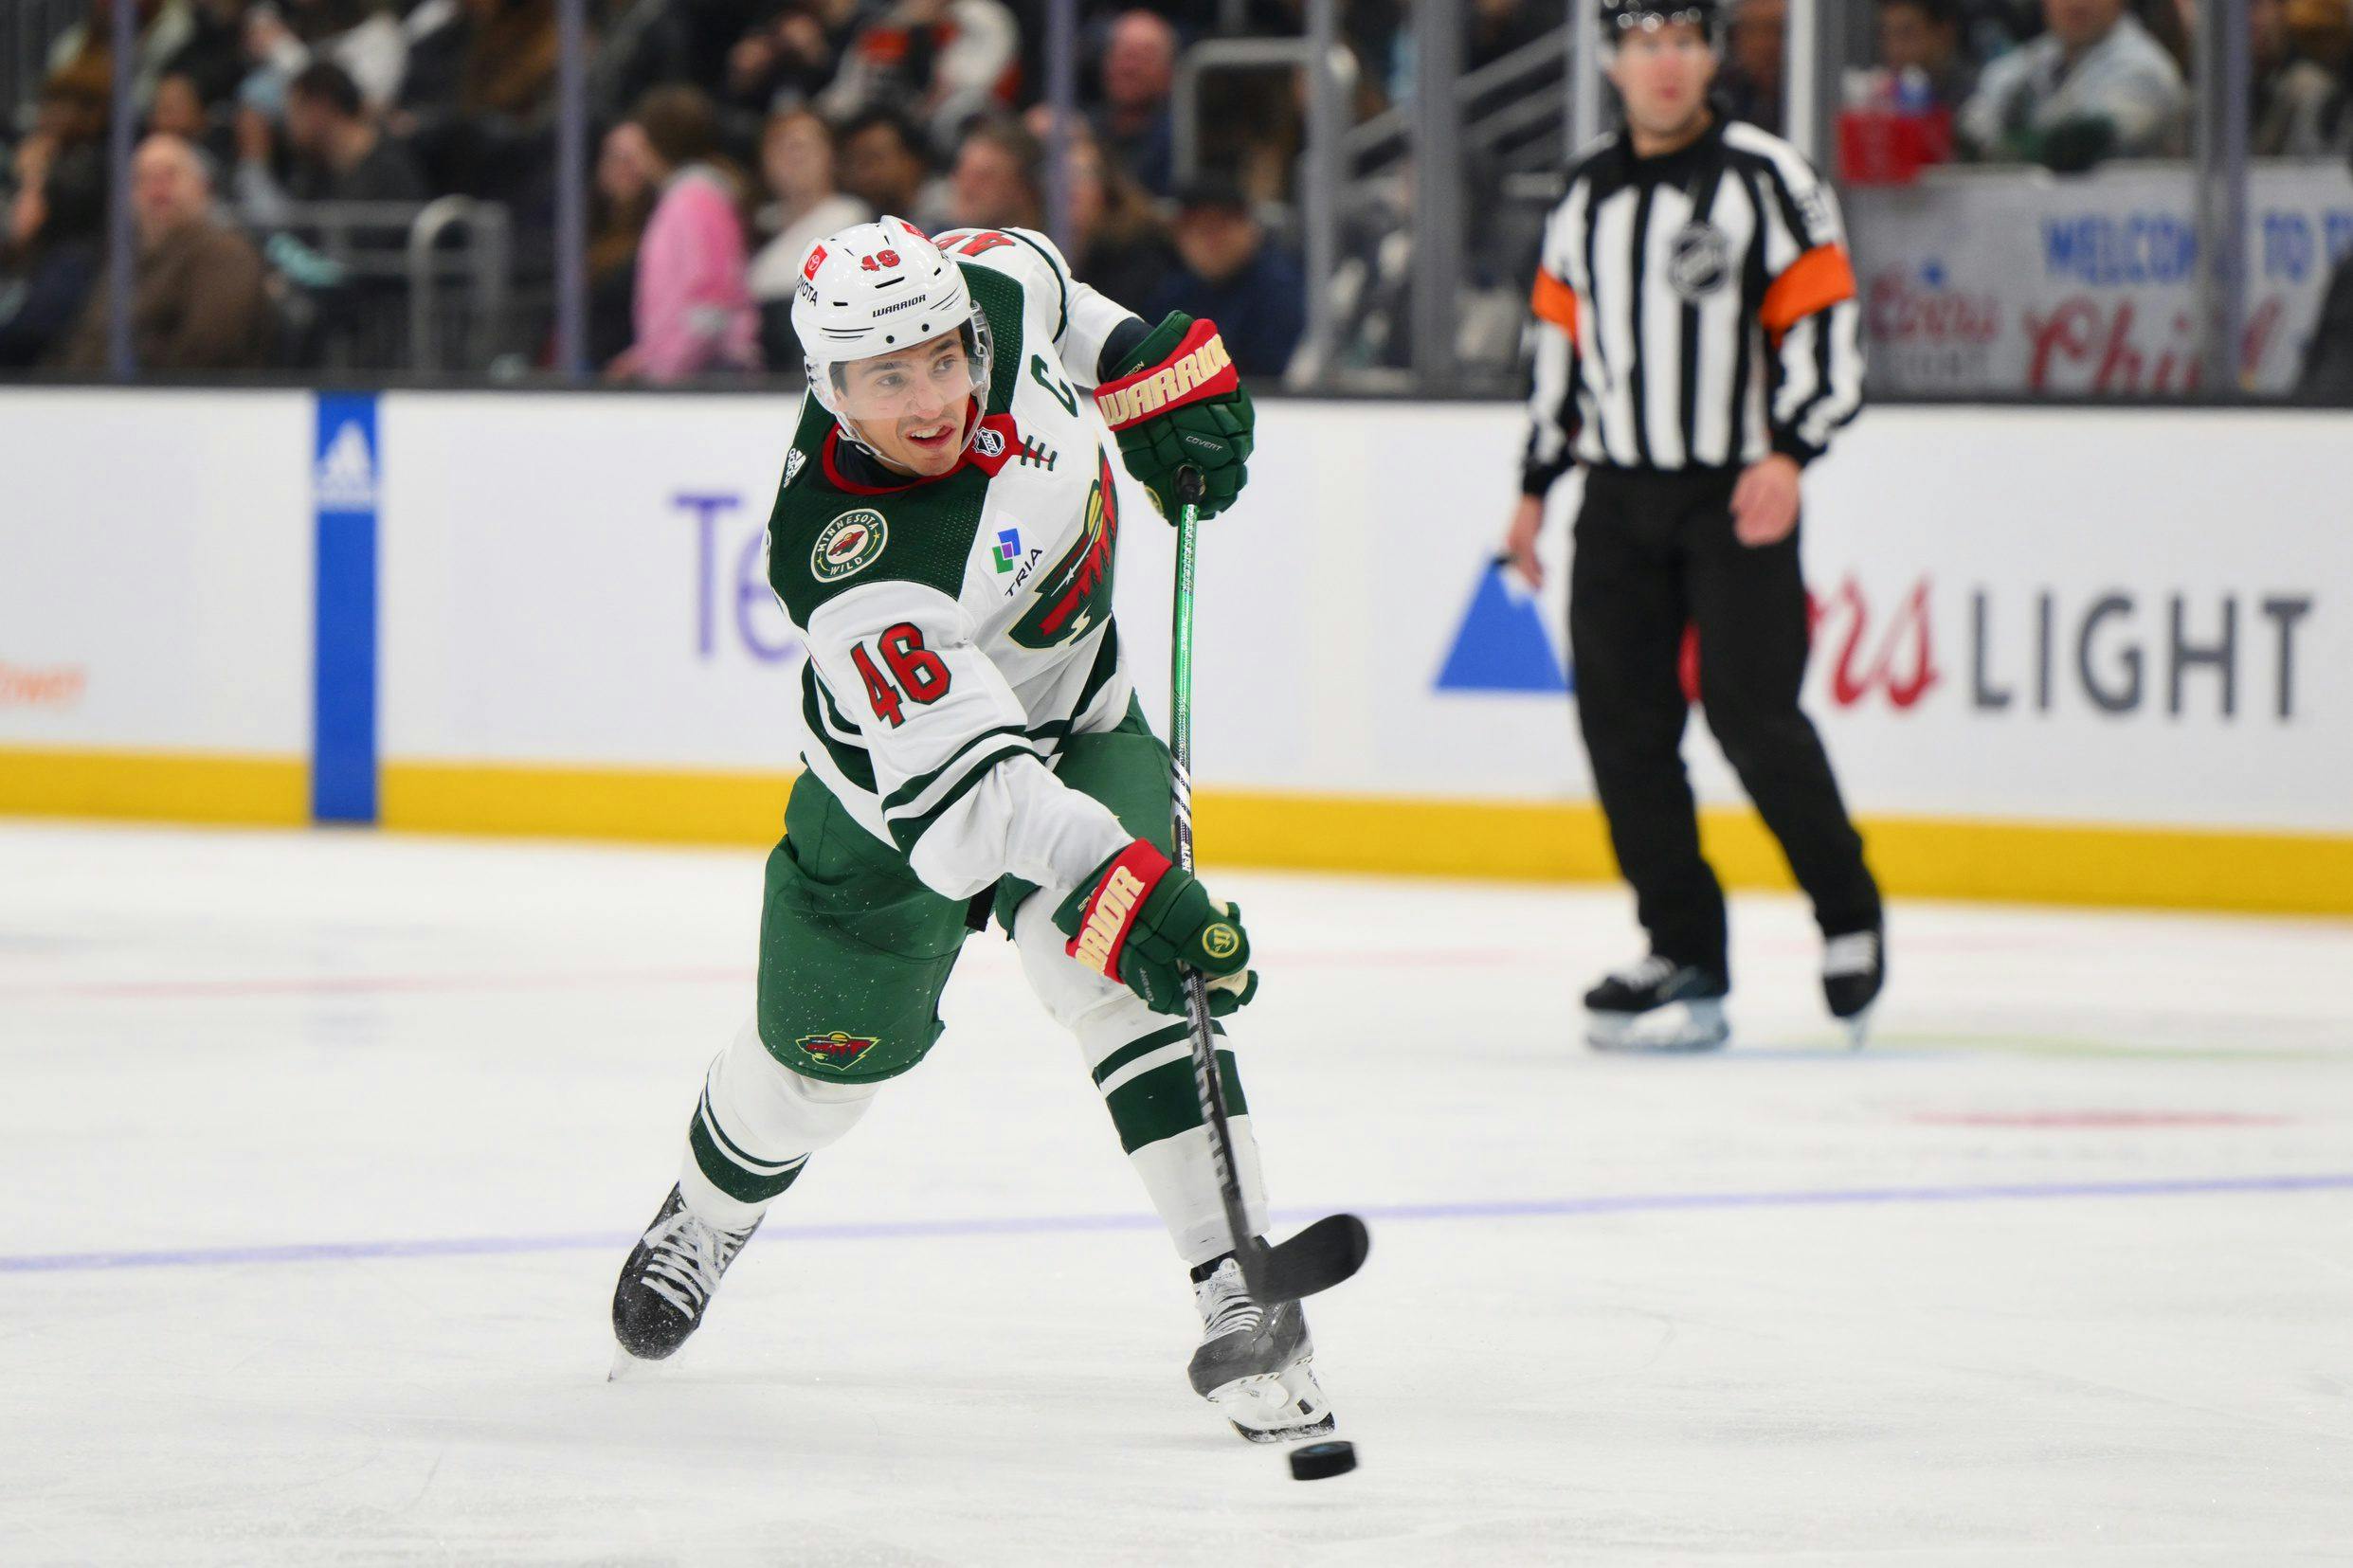 Wild have a tough decision to make with Jared Spurgeon out for the season